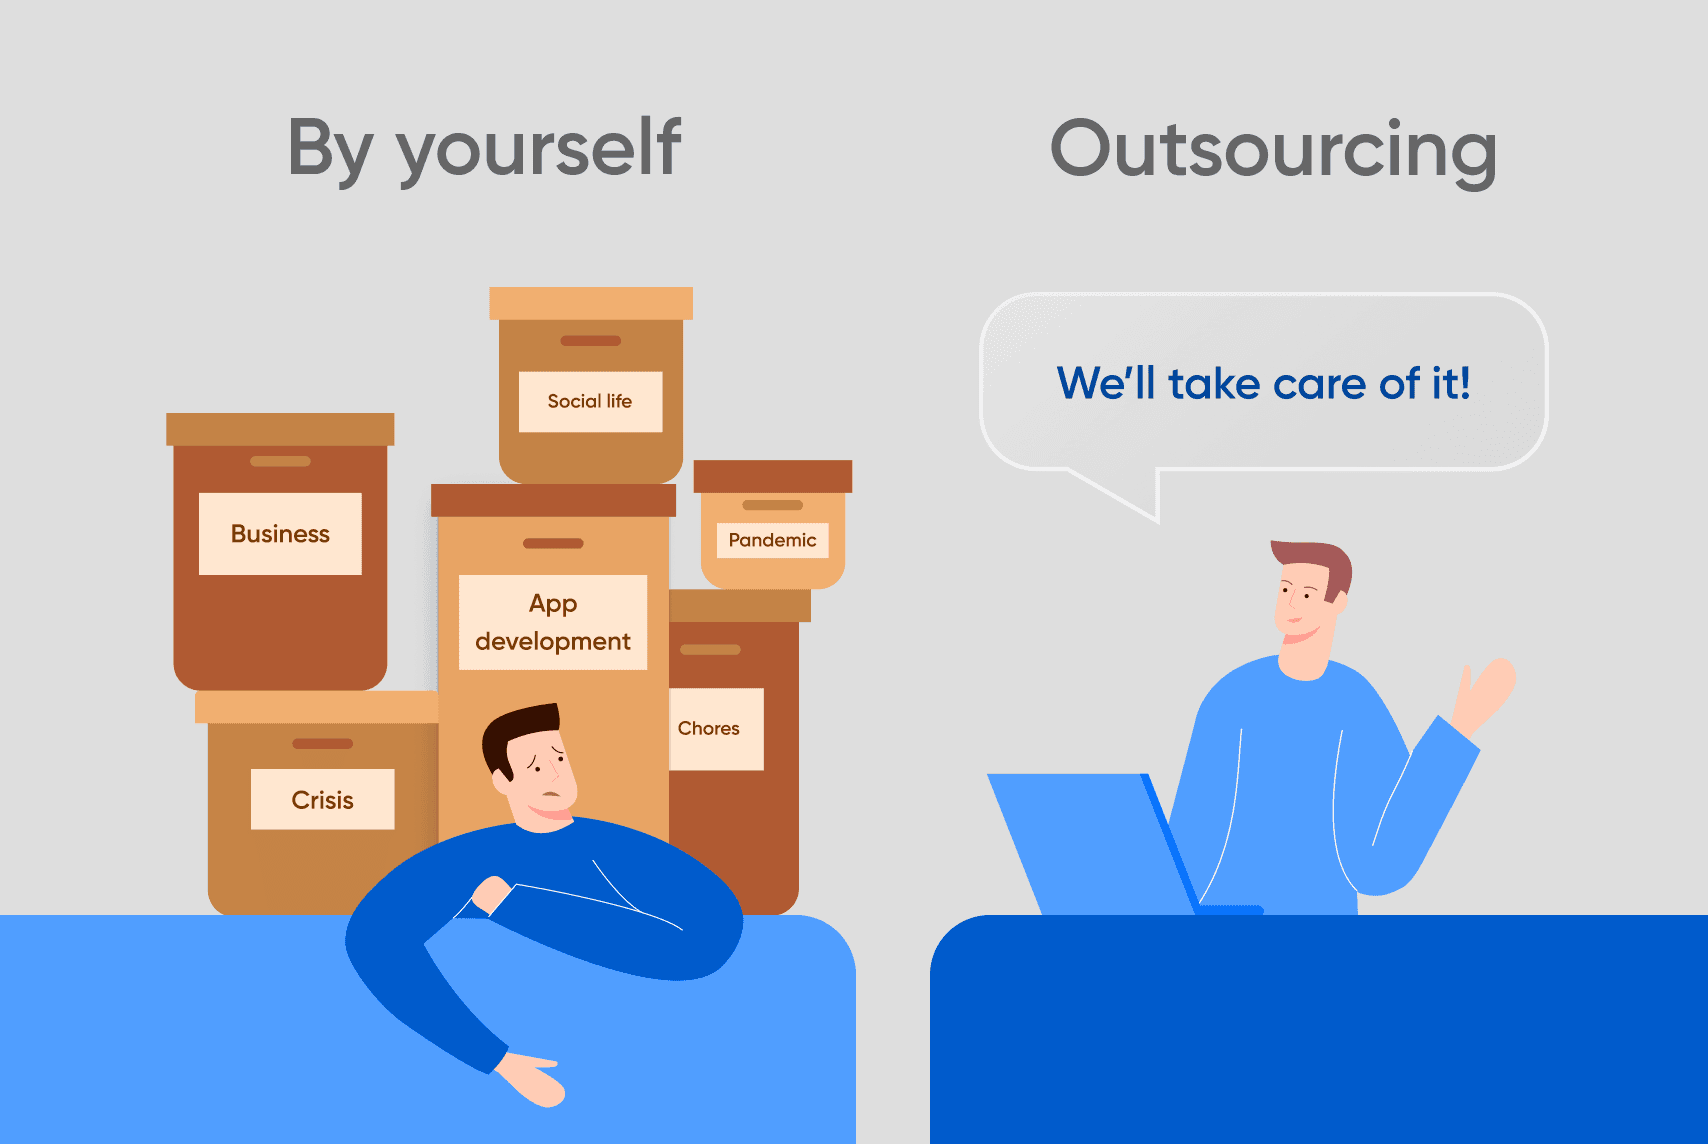 Outsourcing allows you to focus on your job